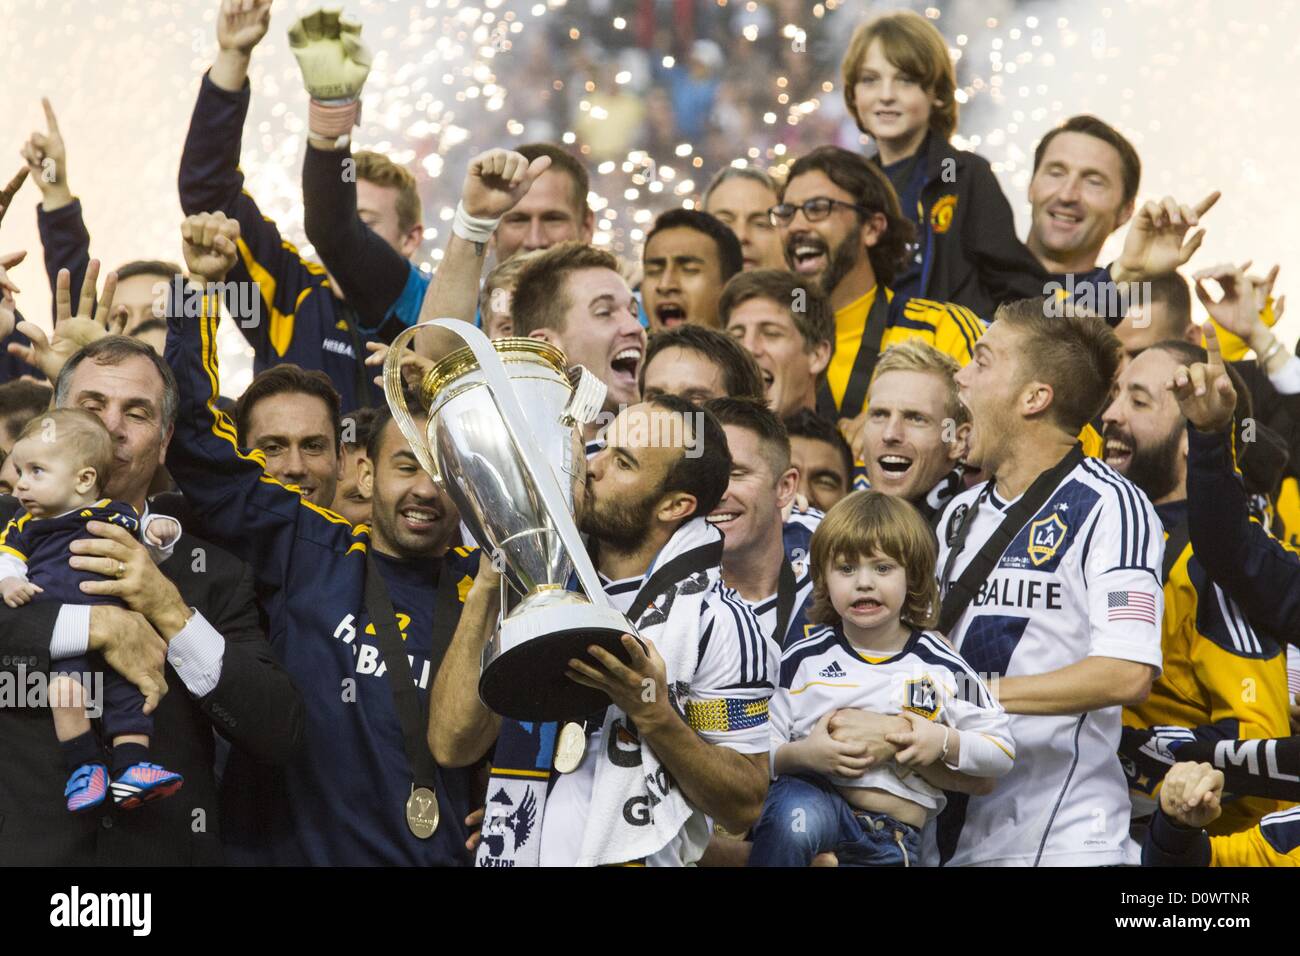 Dec. 1, 2012 - Los Angeles, California (CA, United States - Los Angeles Galaxy Landon Donovan #10 kisses the trophy as he celebrates with teammates after the Galaxy defeat the Houston Dynamo 3-1 to win the 2012 Major League Soccer (MLS) Cup final at the Home Depot Center on December 1, 2012 in Carson, California. (Credit Image: © Ringo Chiu/ZUMAPRESS.com) Stock Photo